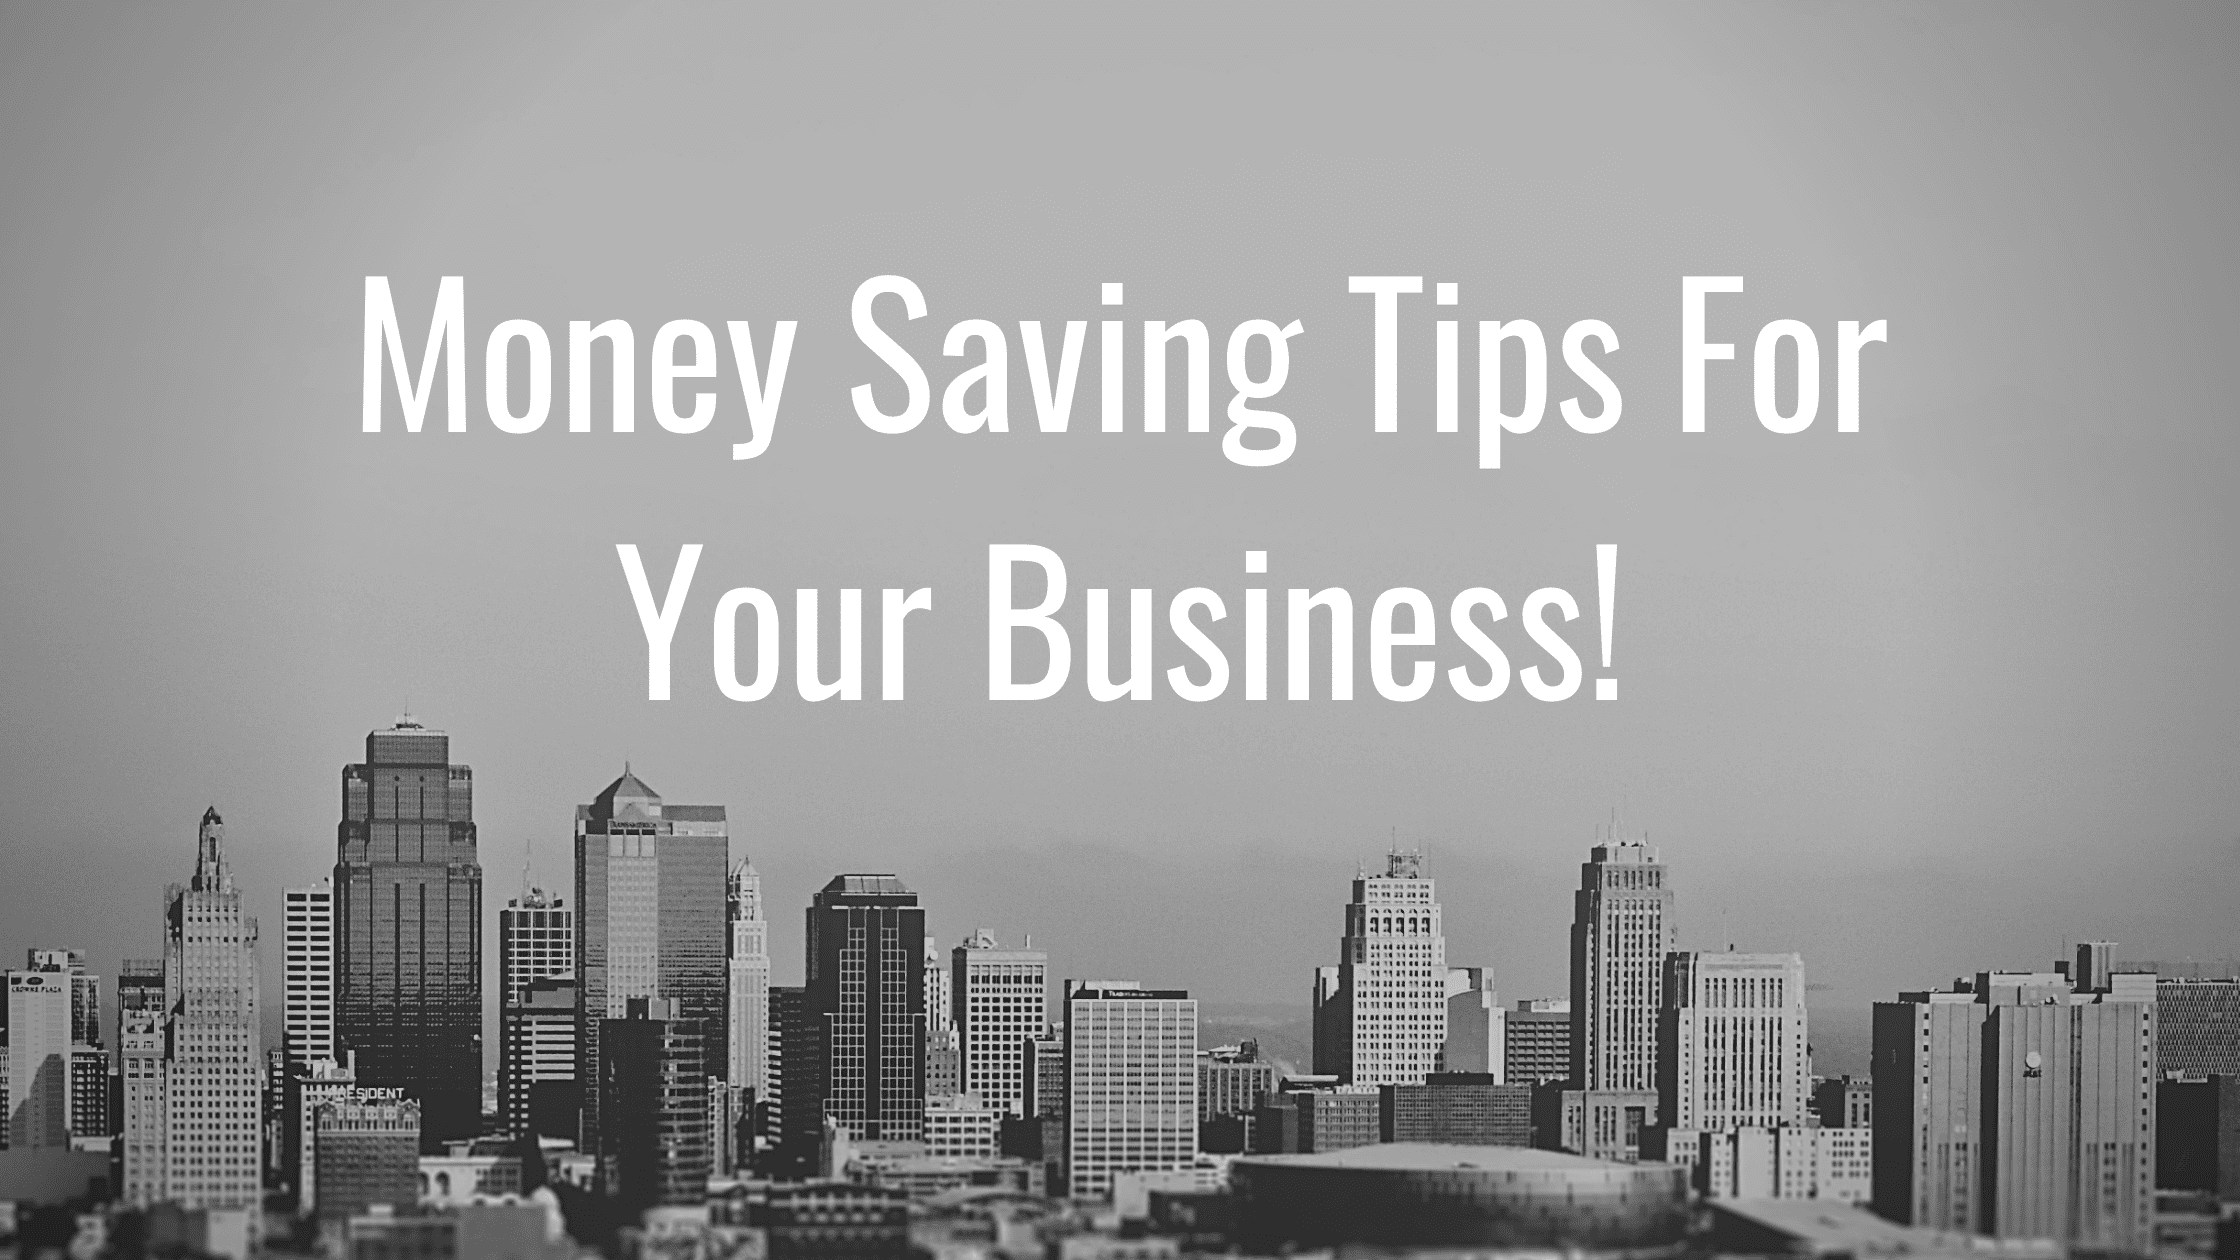 Money saving tips for your small business!